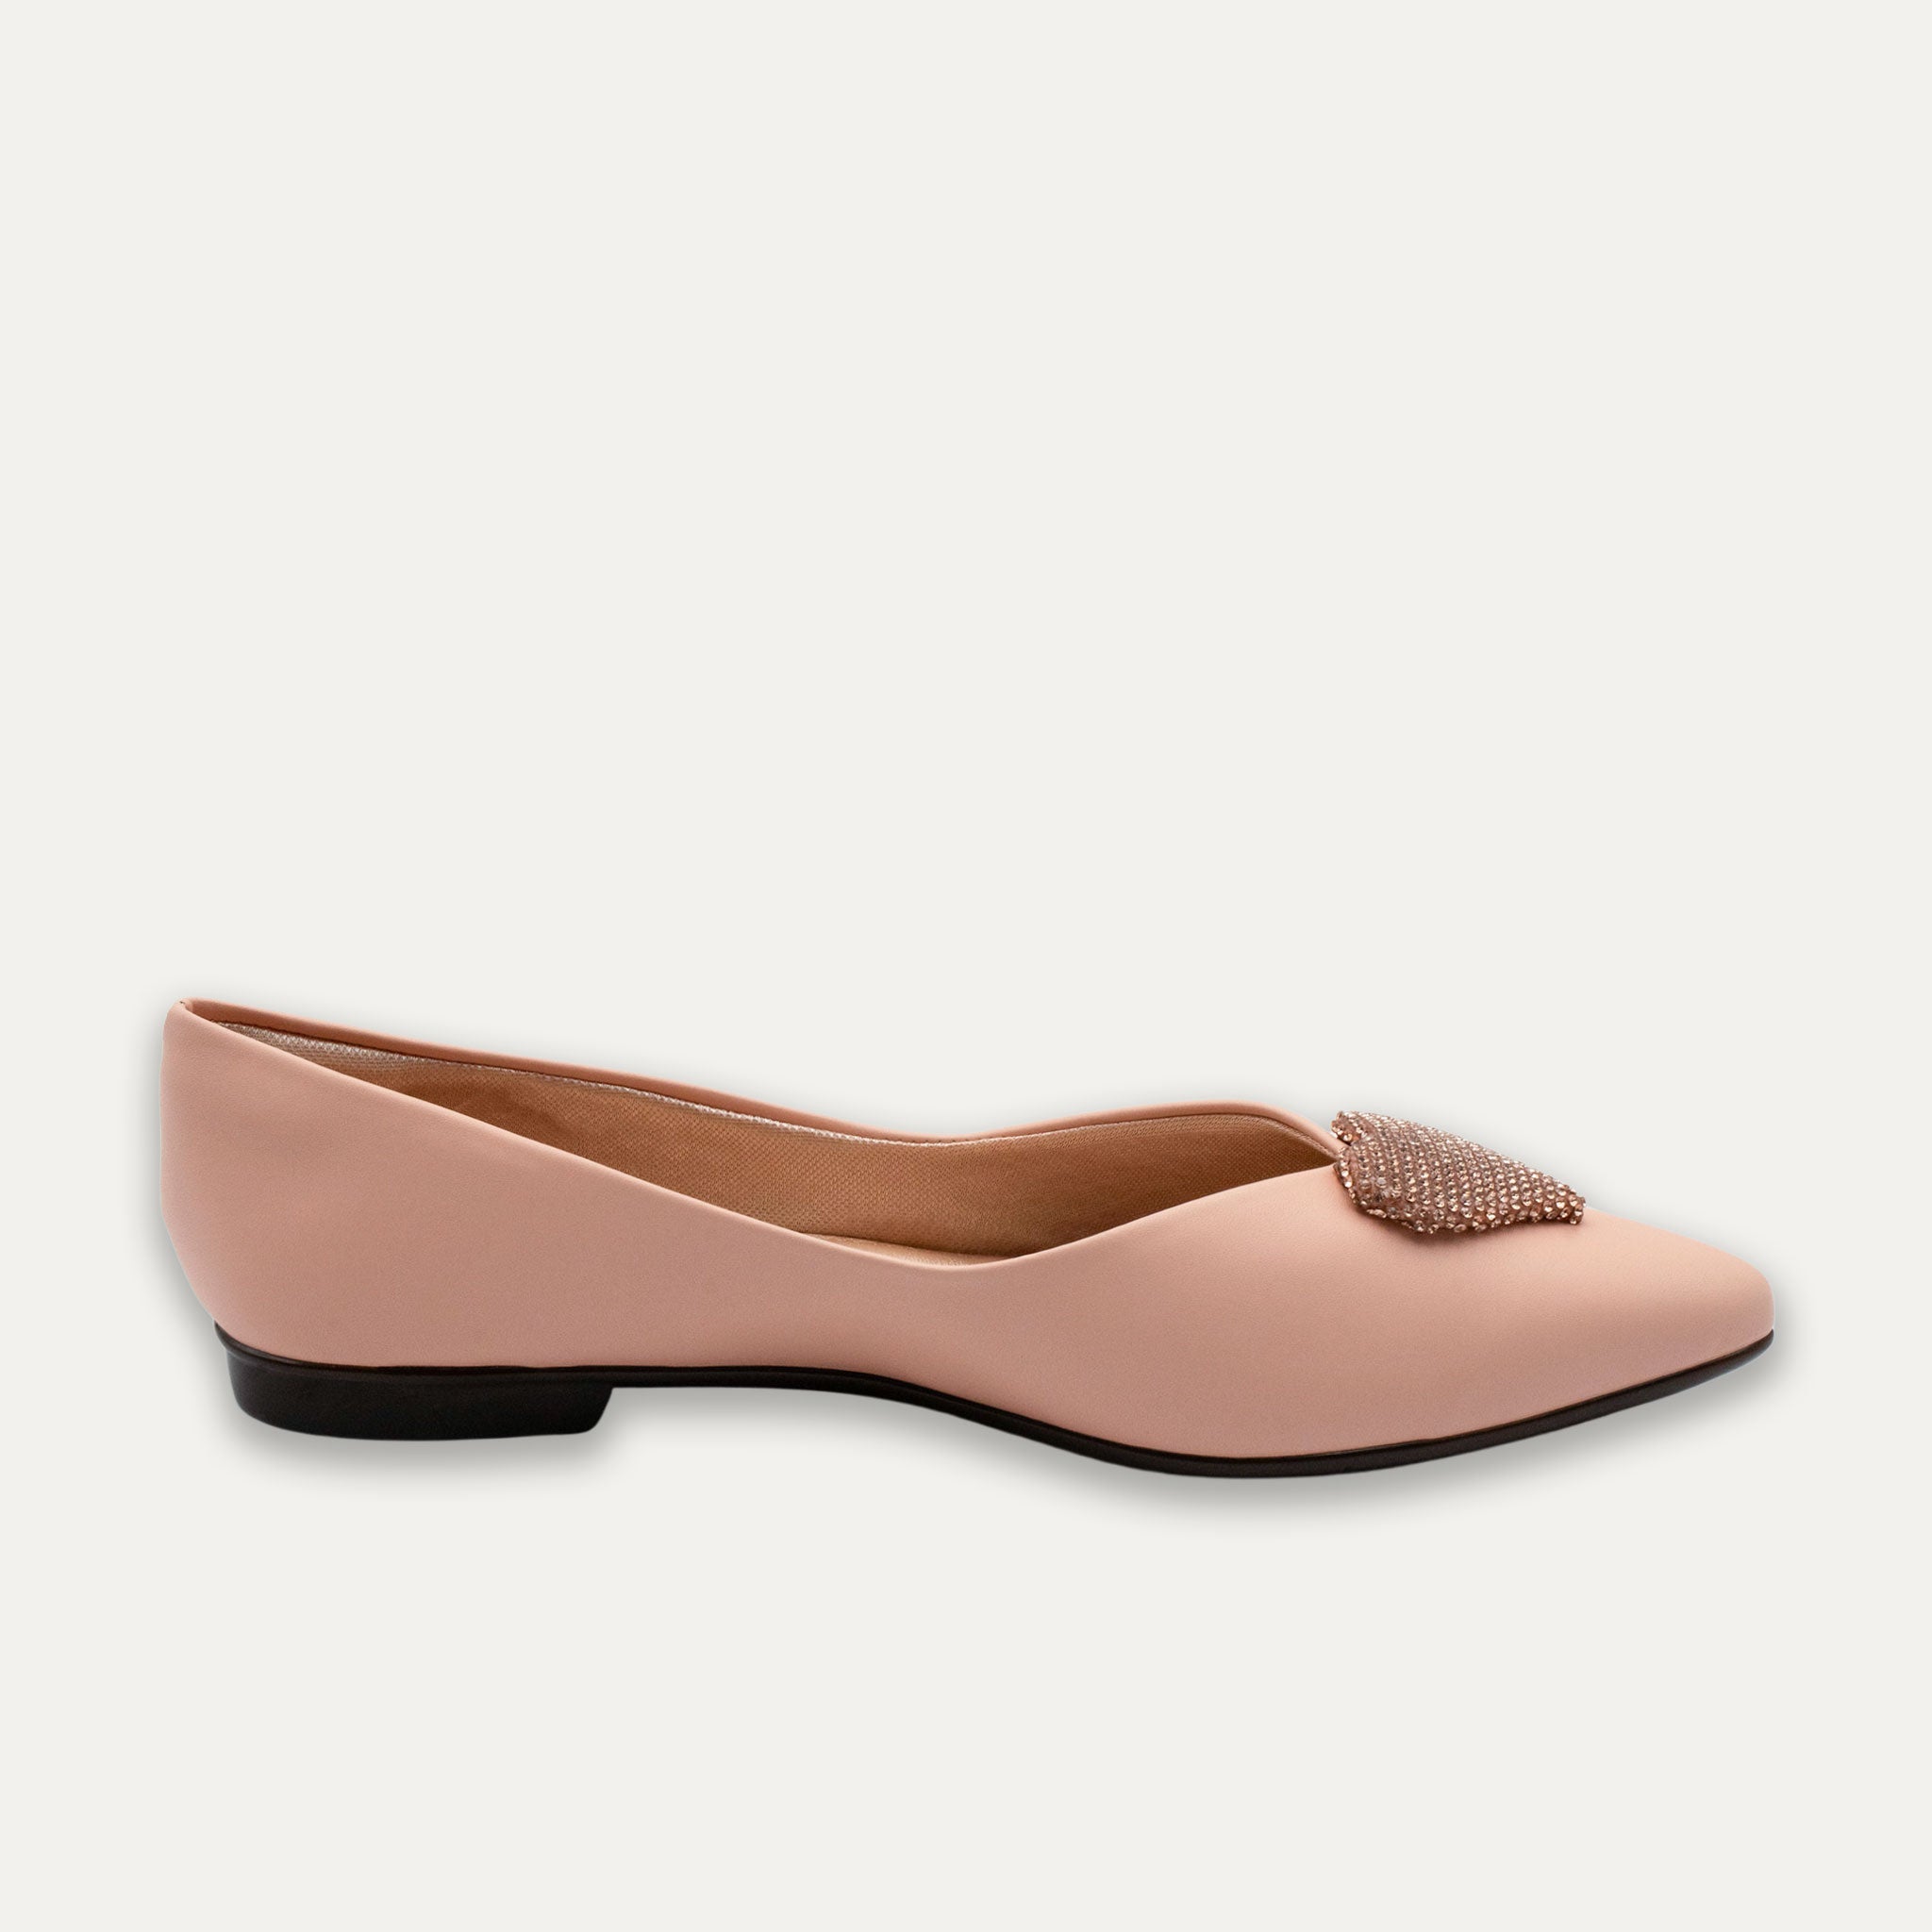 Leticia Heart Pointed Toe Flats Apricot